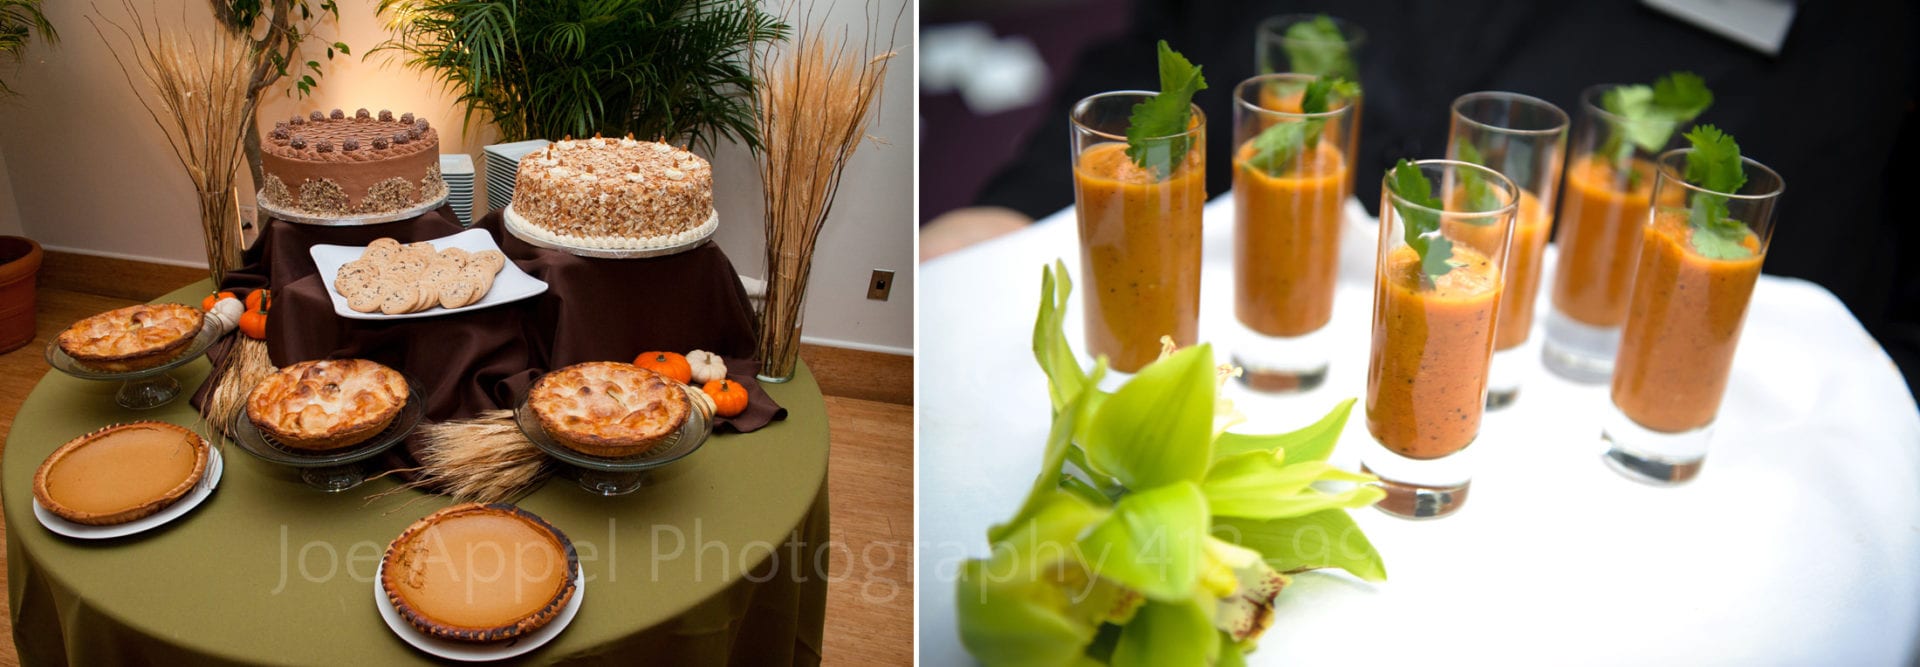 an assortment of pies cakes and cookies sit beside bloody marys Phipps Conservatory Weddings